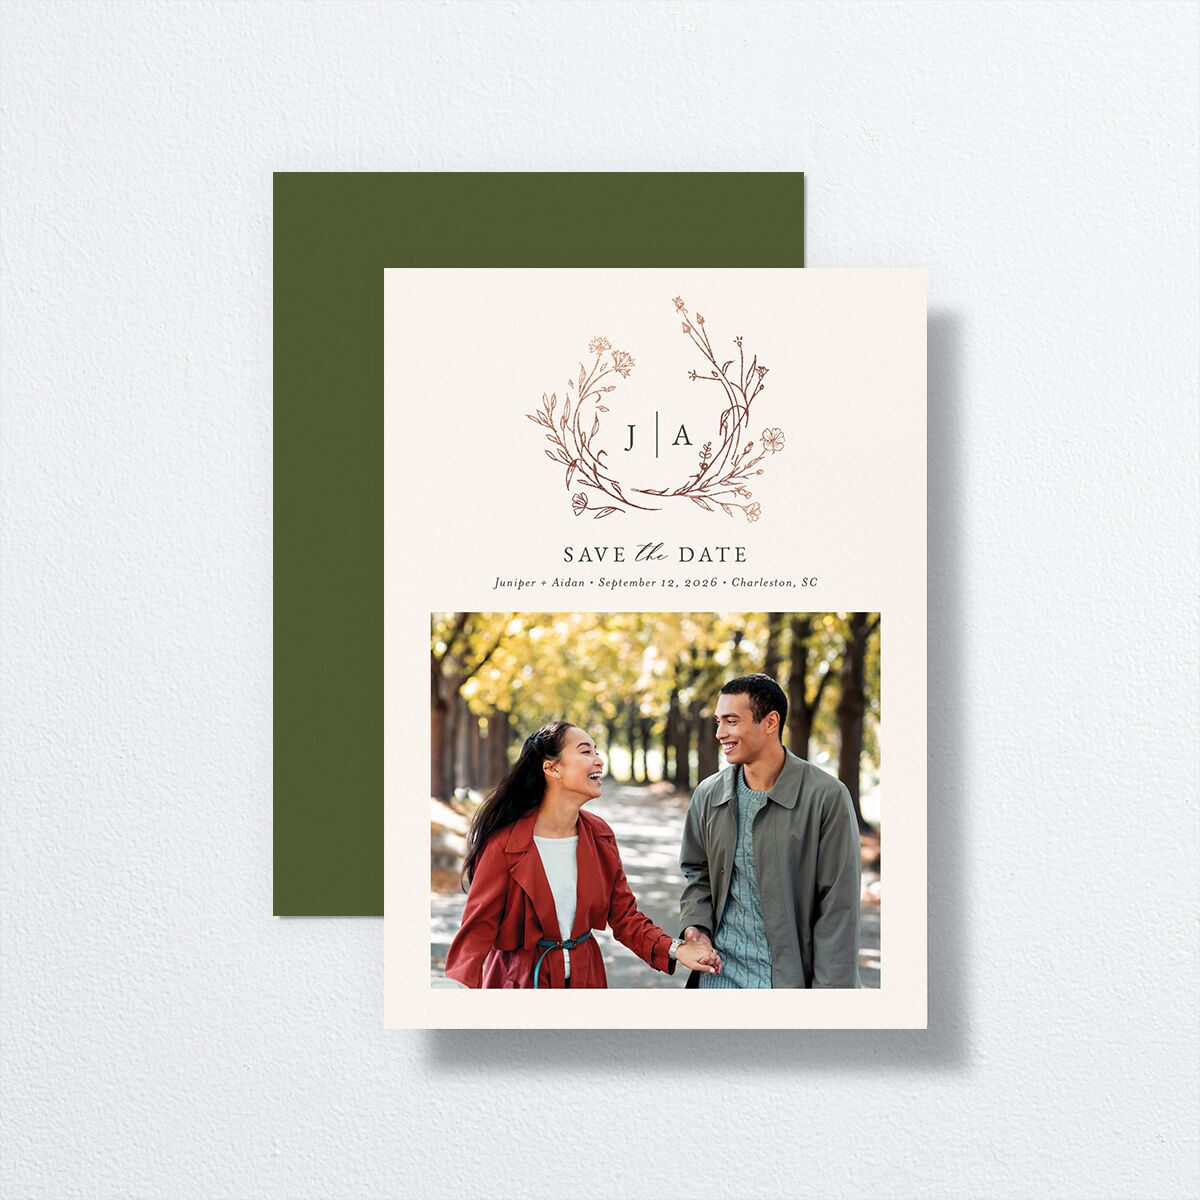 Gilded Monogram Save The Date Cards front-and-back